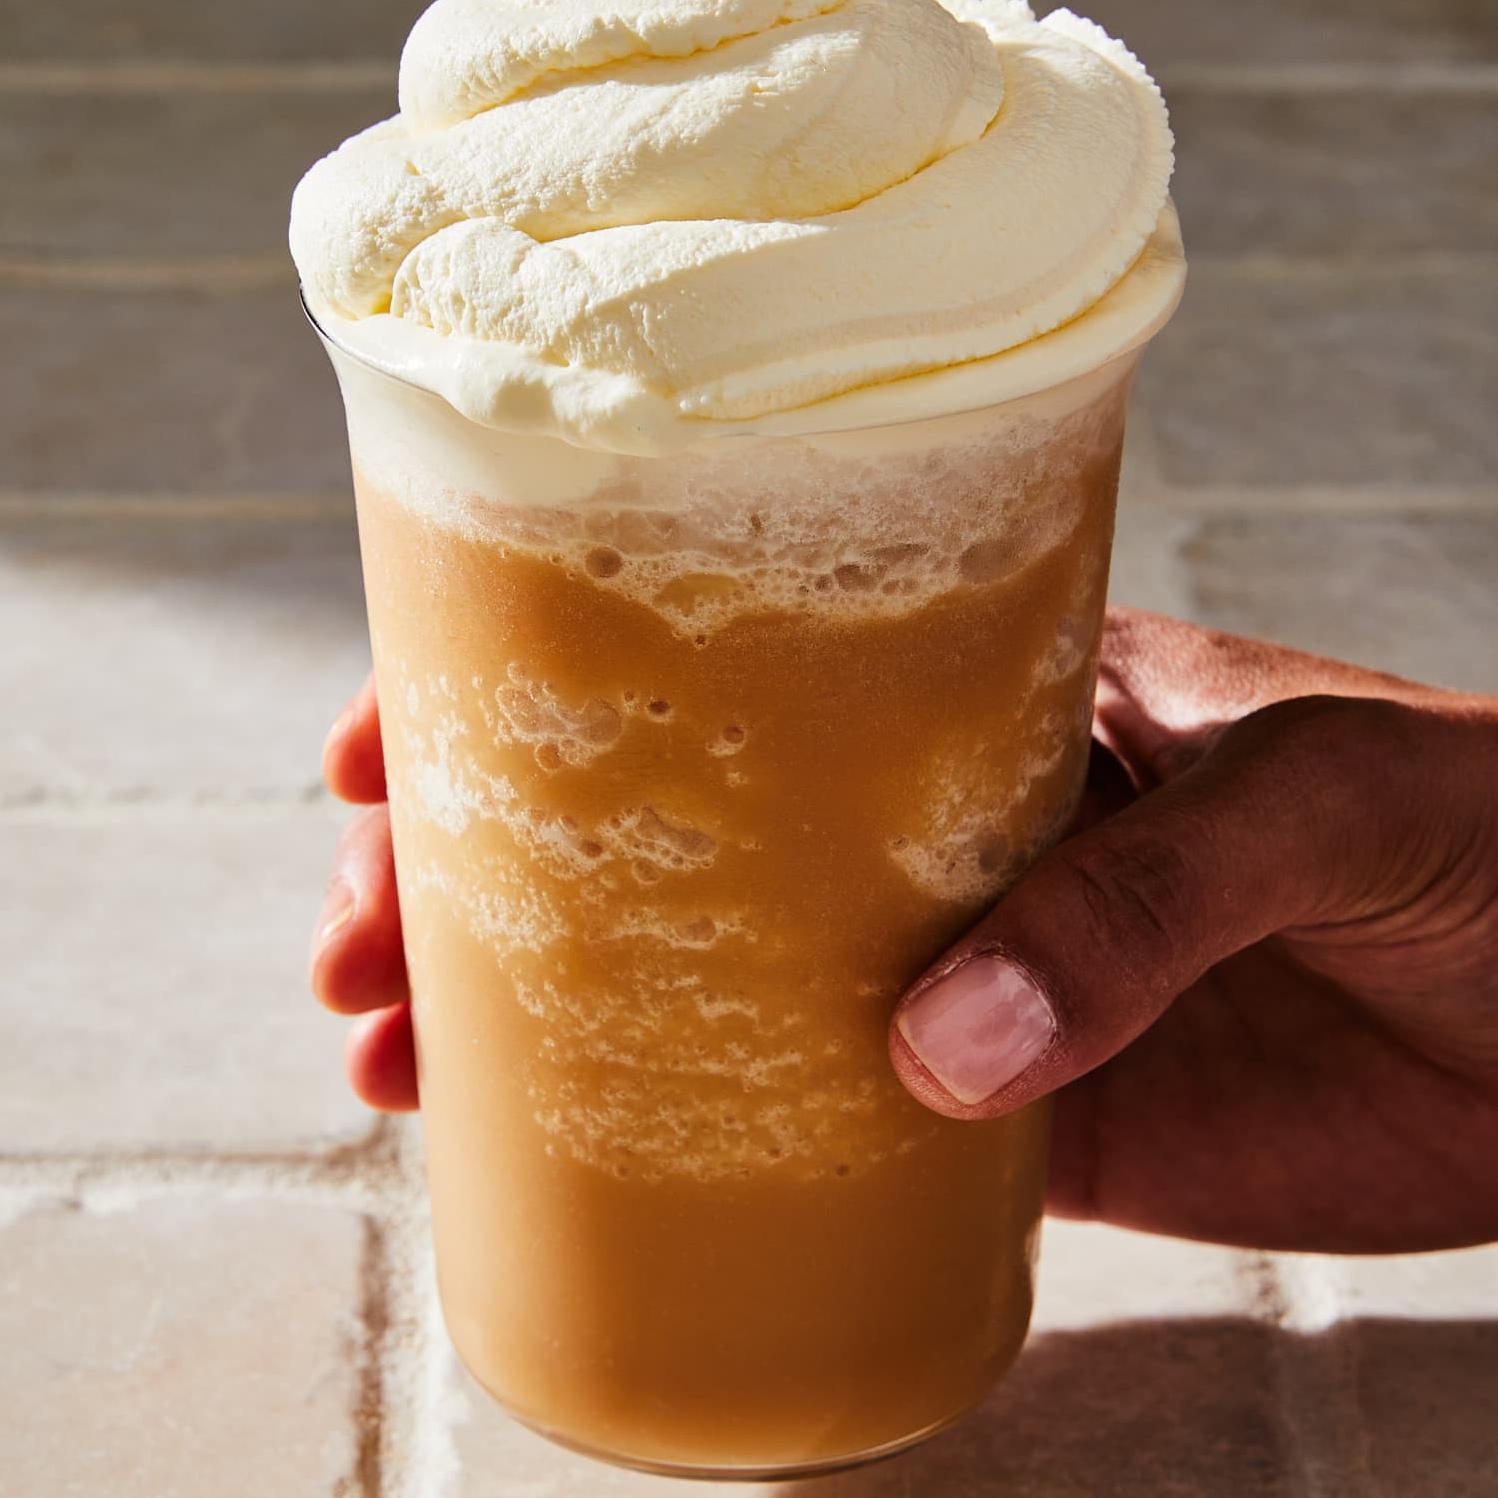  Keep your cool with this refreshing blended iced coffee shooter that will keep you energized all day long.